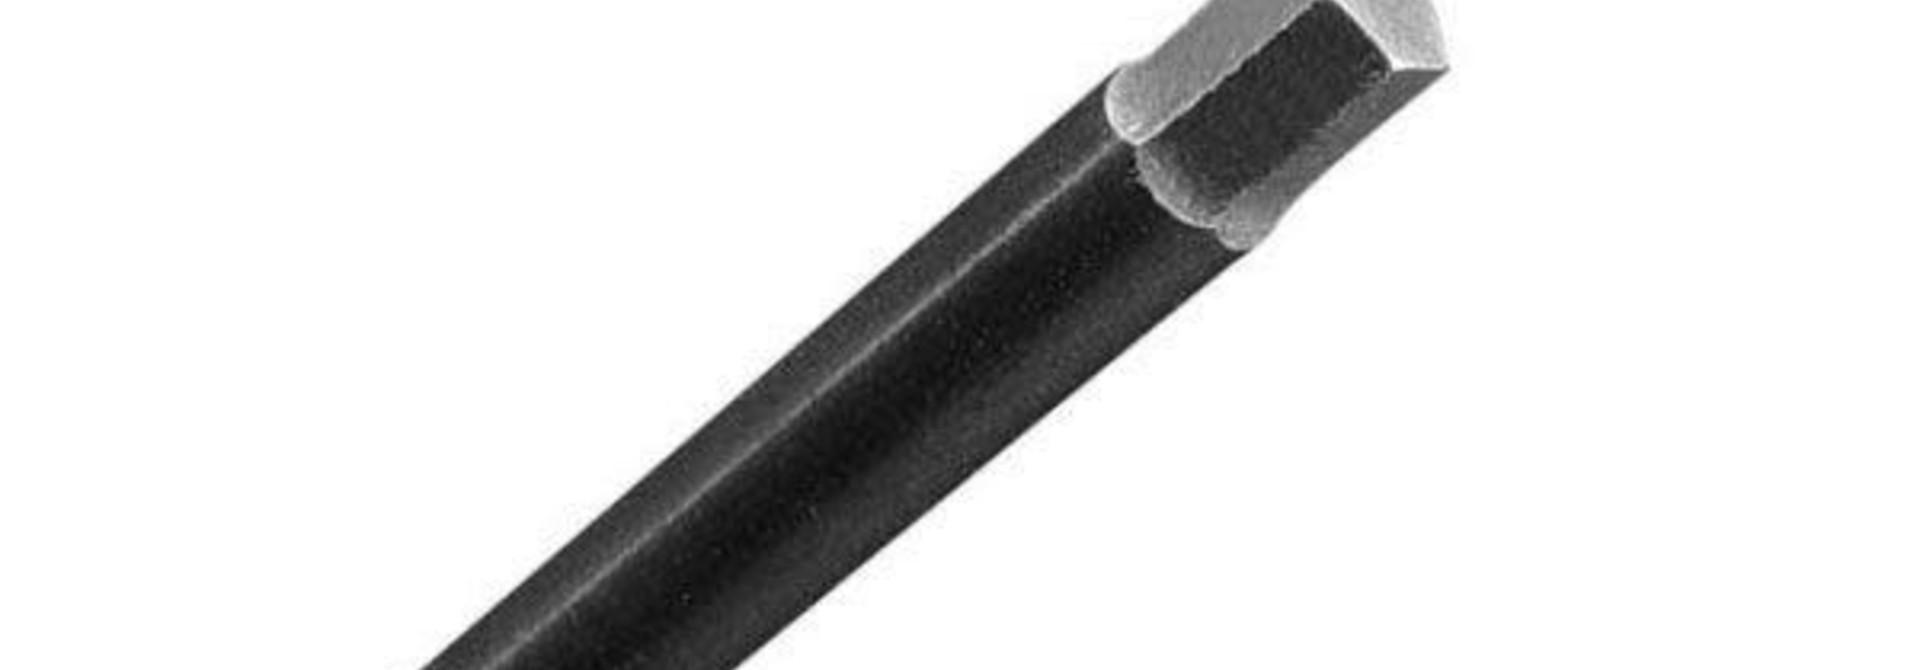 Replacement Tip .093 X 120 mm (3:32). H129341